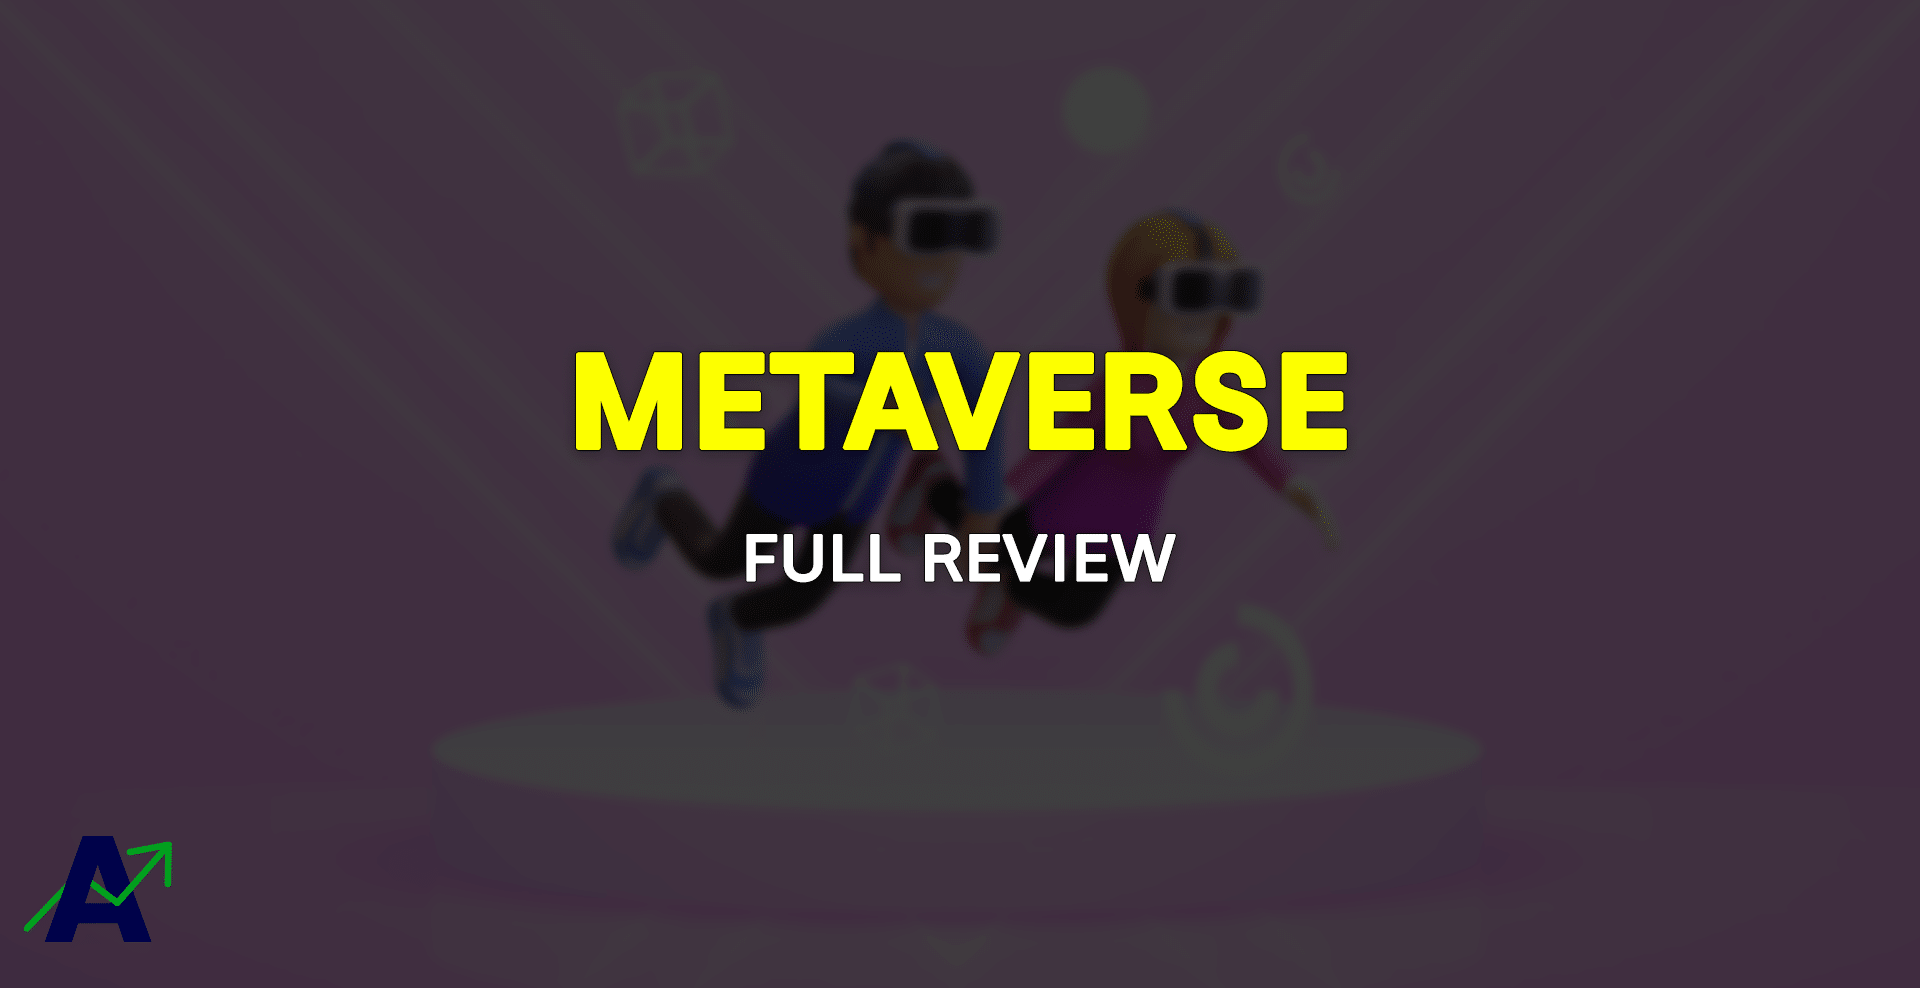 What is The Metaverse